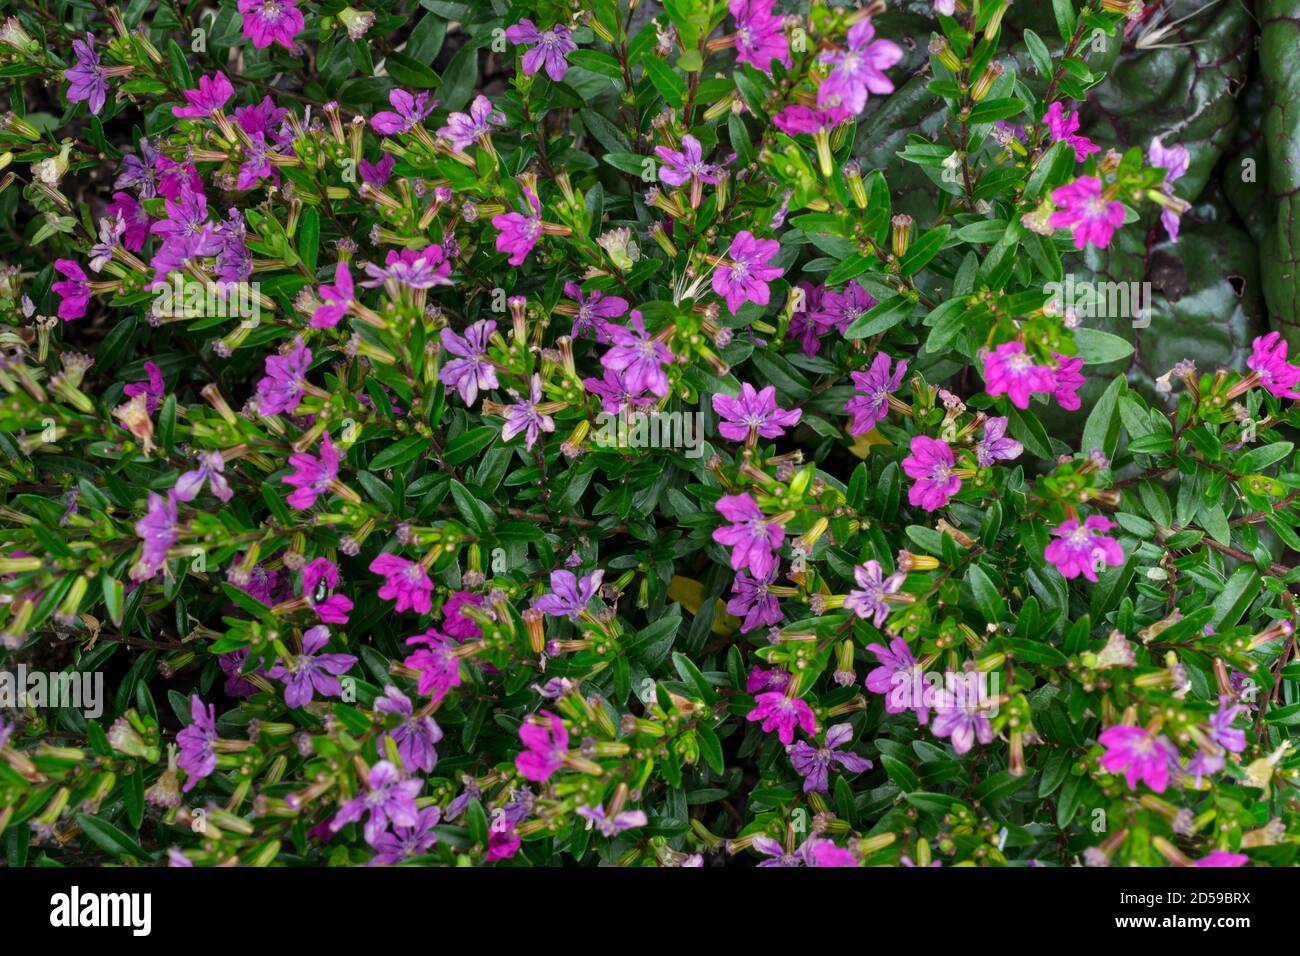 The Mexican Heather or Cuphea hyssopifolia, shown here in a French shrubbery, is native to Mexico and has become established in Hawaii. Stock Photo